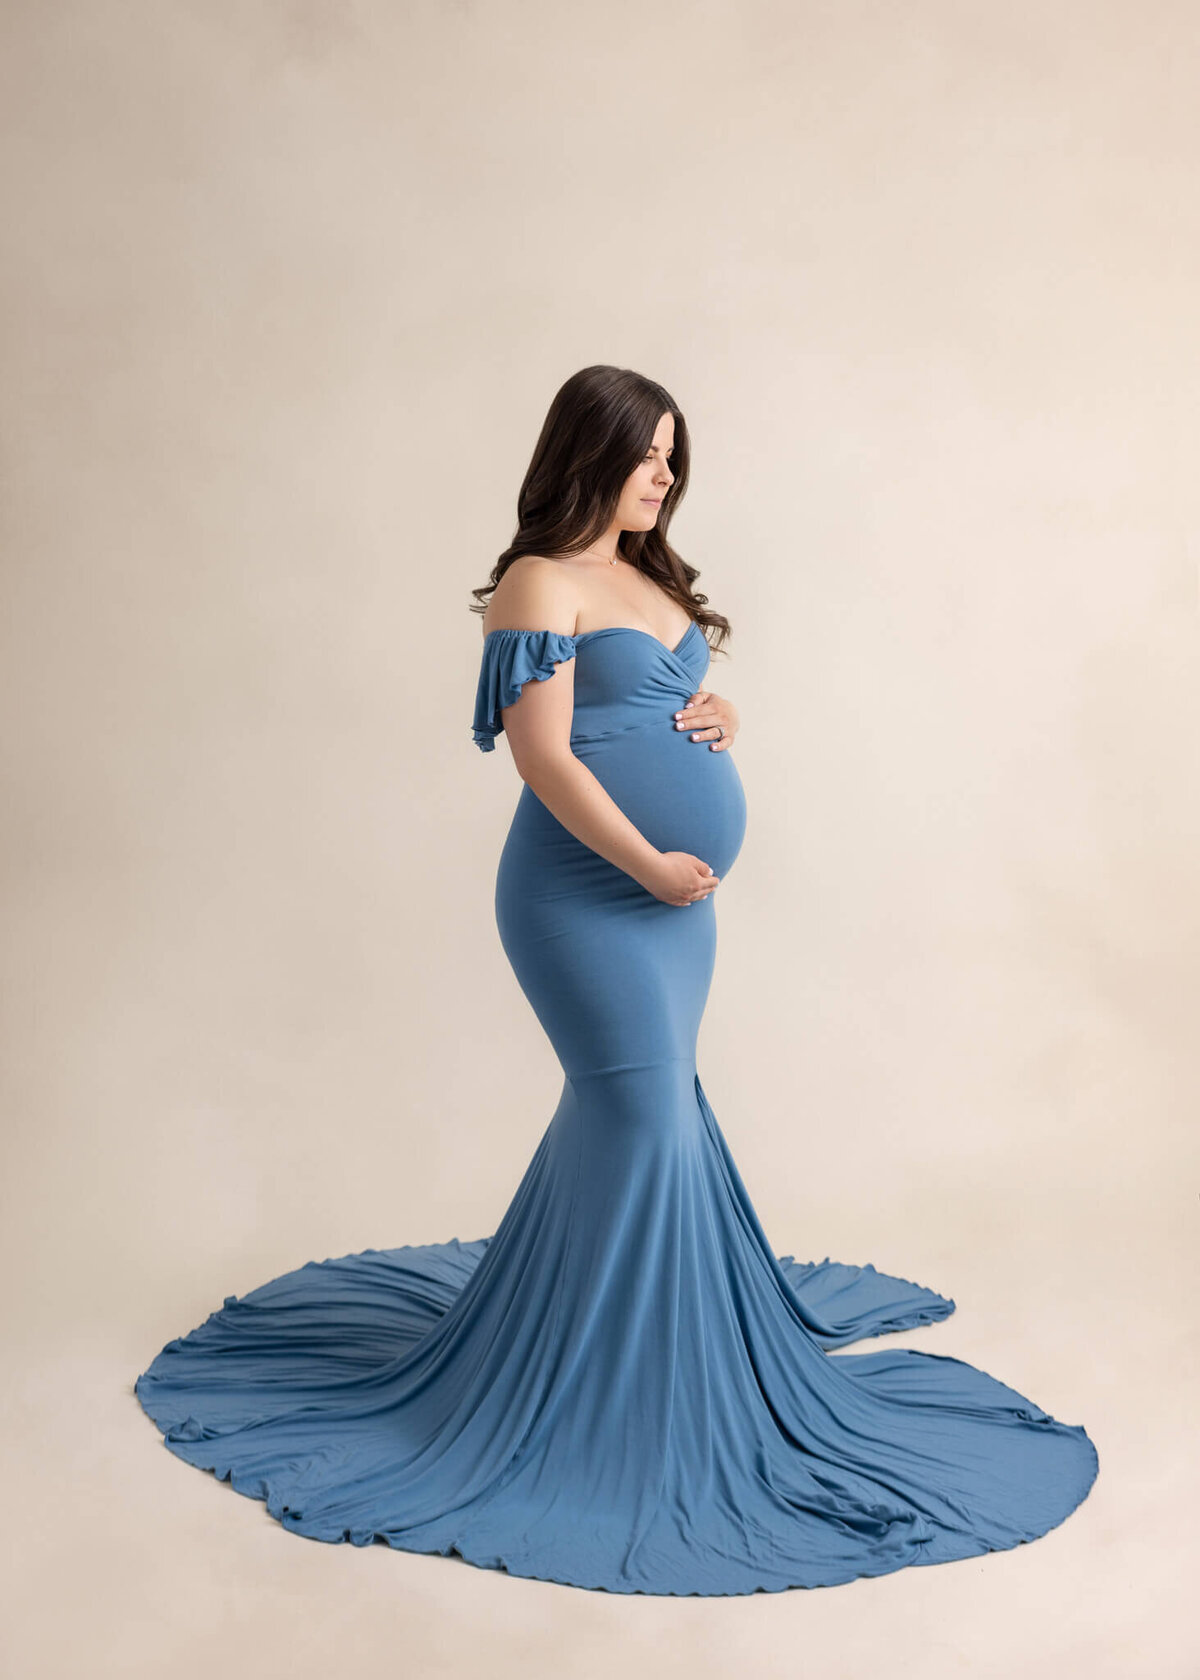 expectant mom in a blue dress cradling her belly